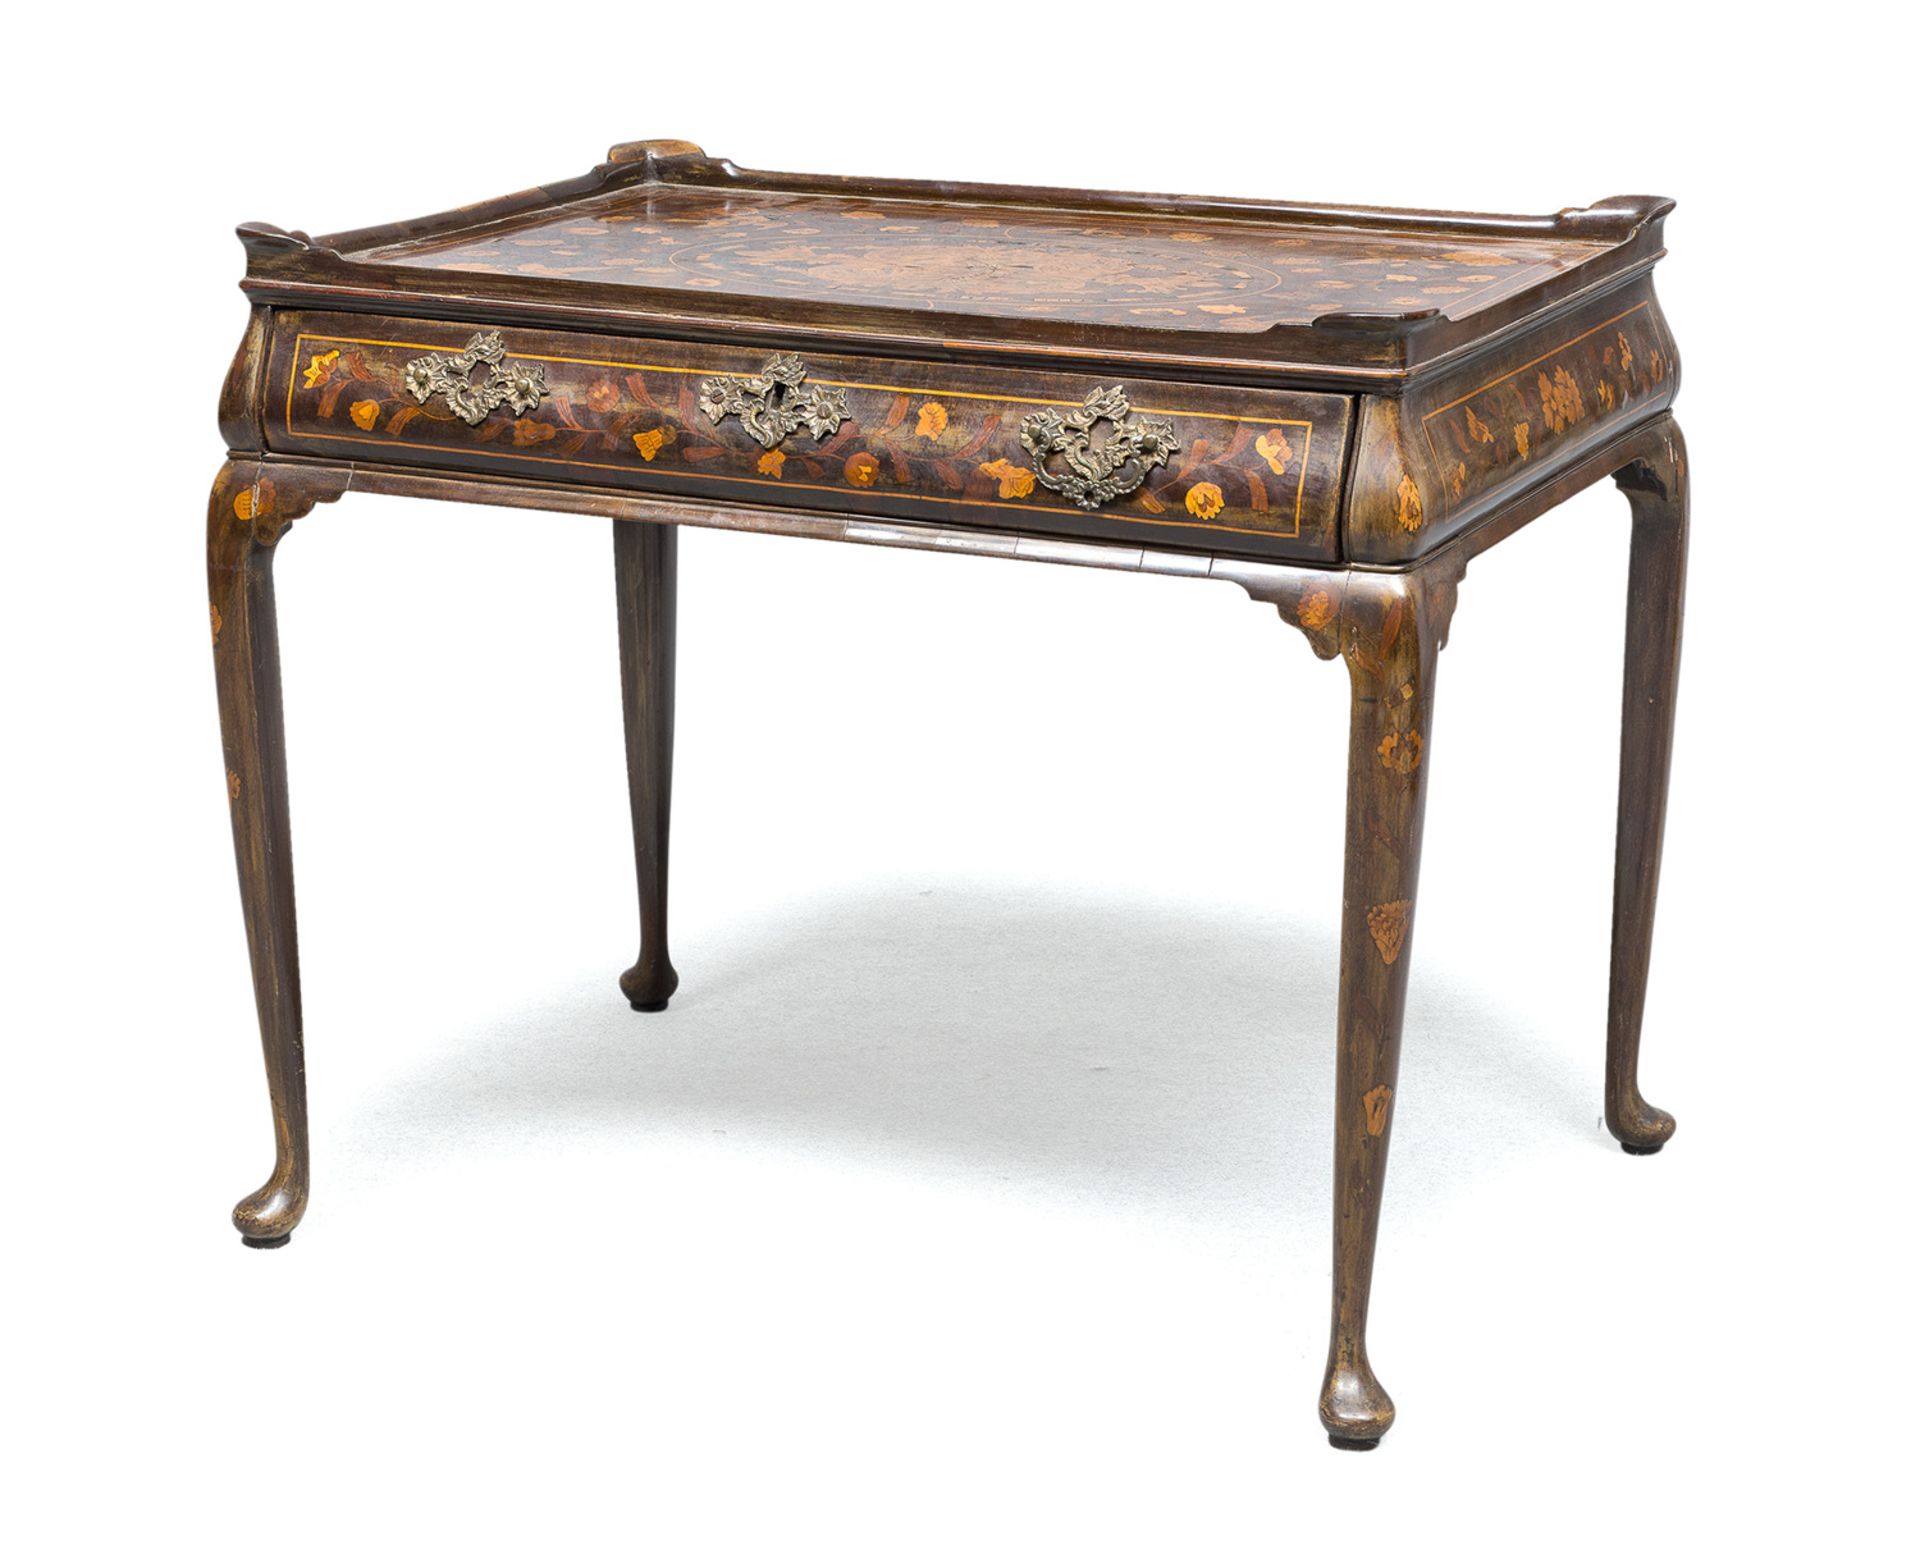 ROSEWOOD TABLE HOLLAND LATE 18th CENTURY